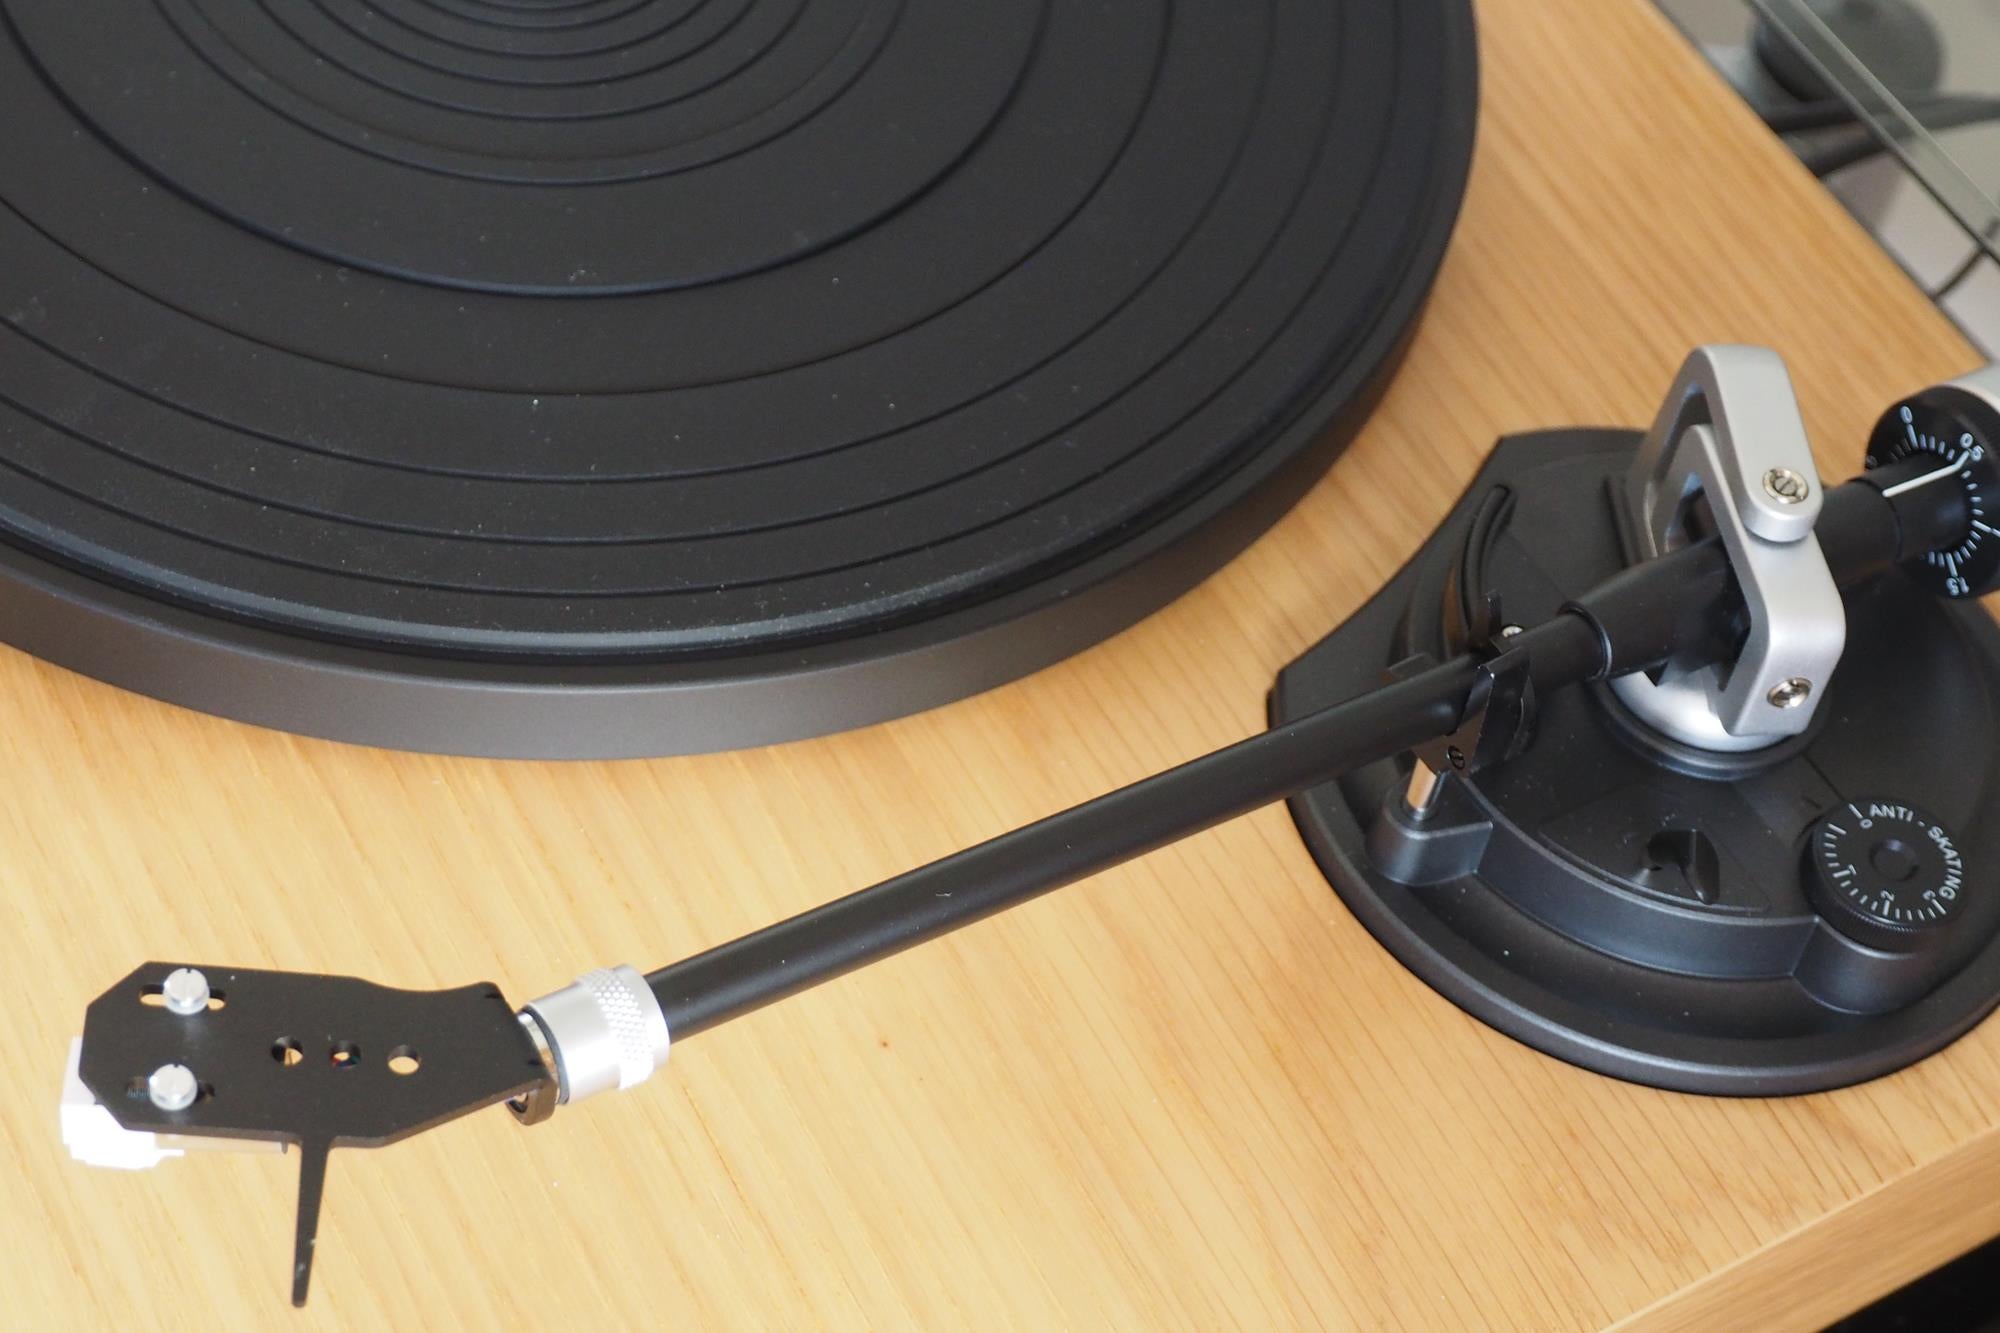 Close-up of Roberts Radio RT100 turntable on a wooden surface